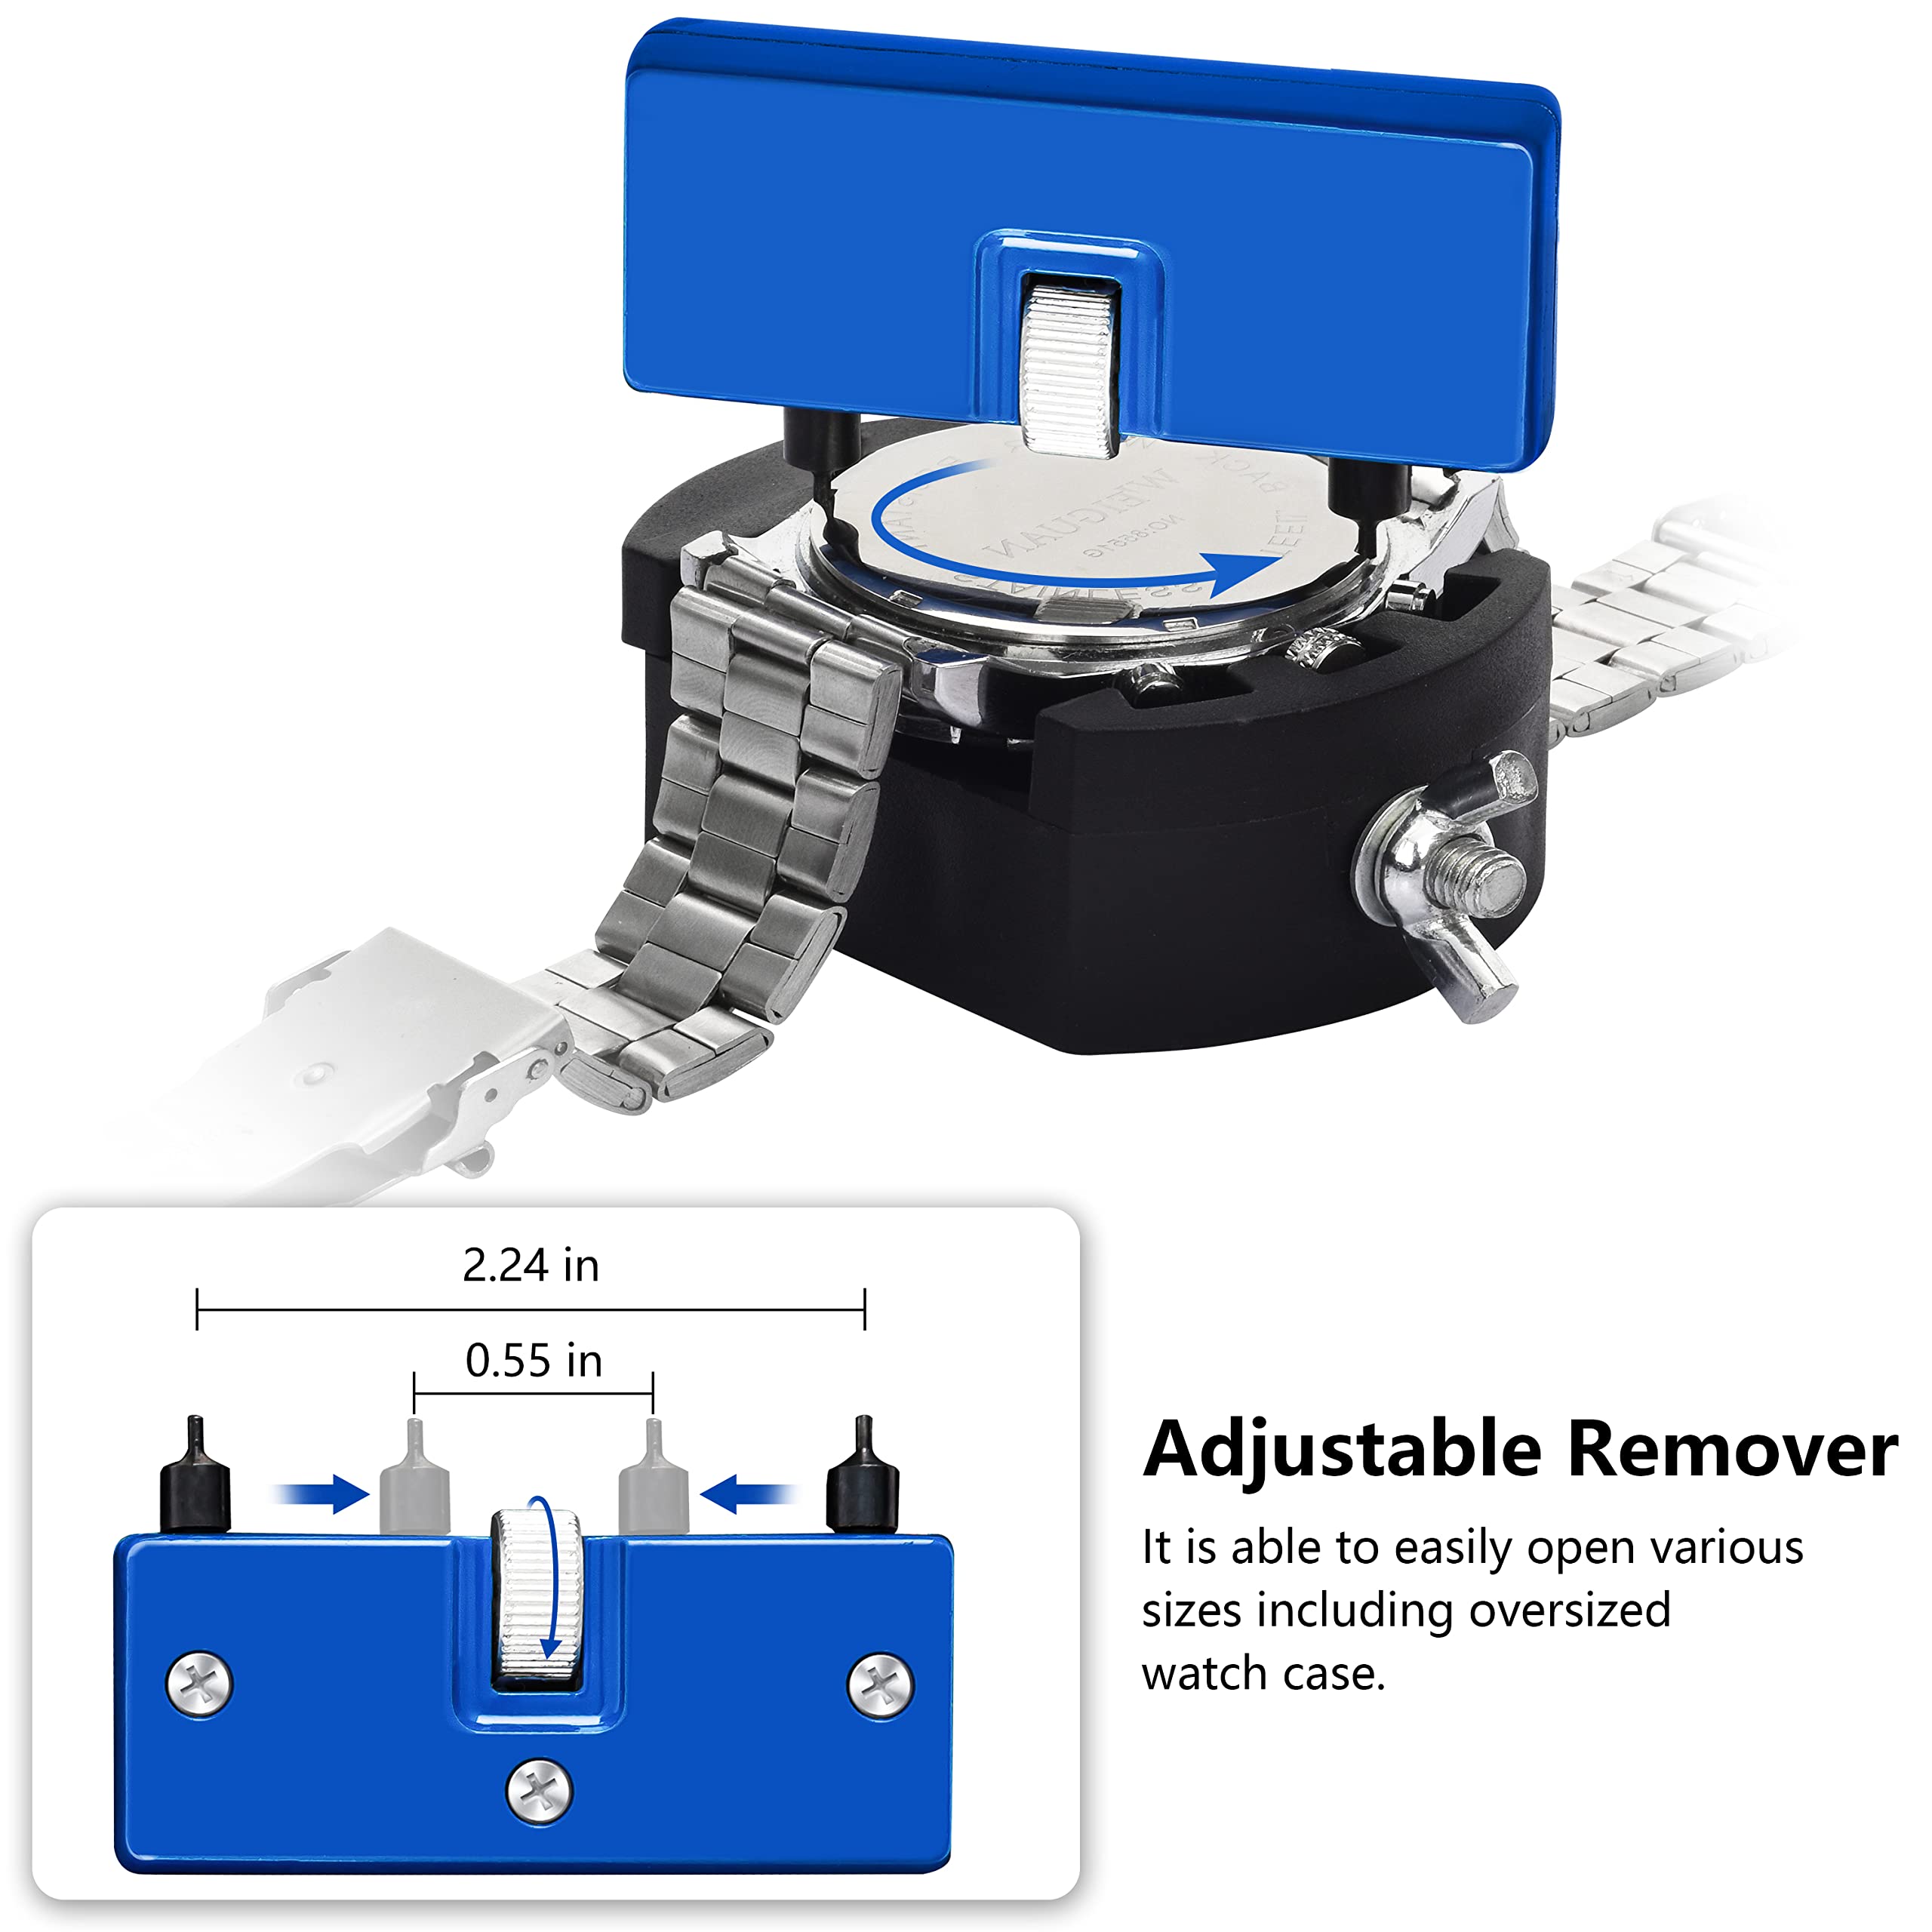 Watch Battery Replacement Kit，Unamela Watch Repair Kit，Watch Back Remover tool and Watch Opener Including 3 Kinds of Removal Tools and Manual, can be Used to Replace The Battery and o-Ring